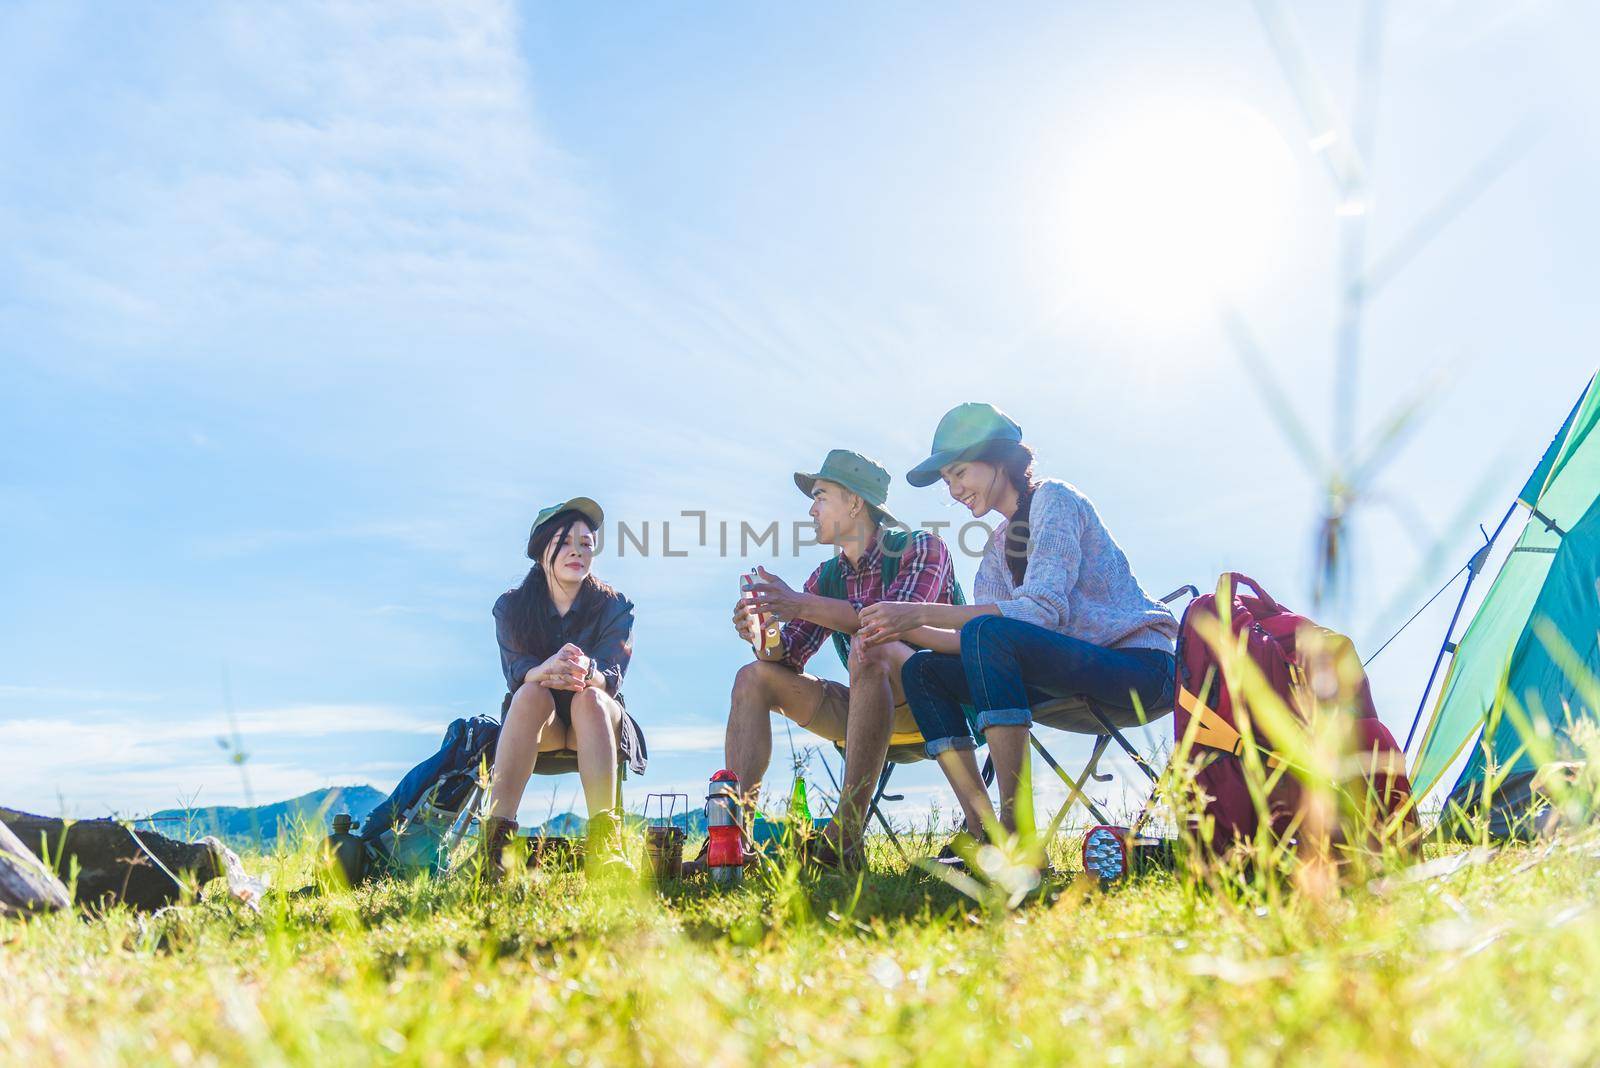 Group of travelers camping and doing picnic in meadow field foreground. Mountain and lake background. People and lifestyles concept. Outdoors activity and leisure theme. Backpacker and Hiker lifestyle